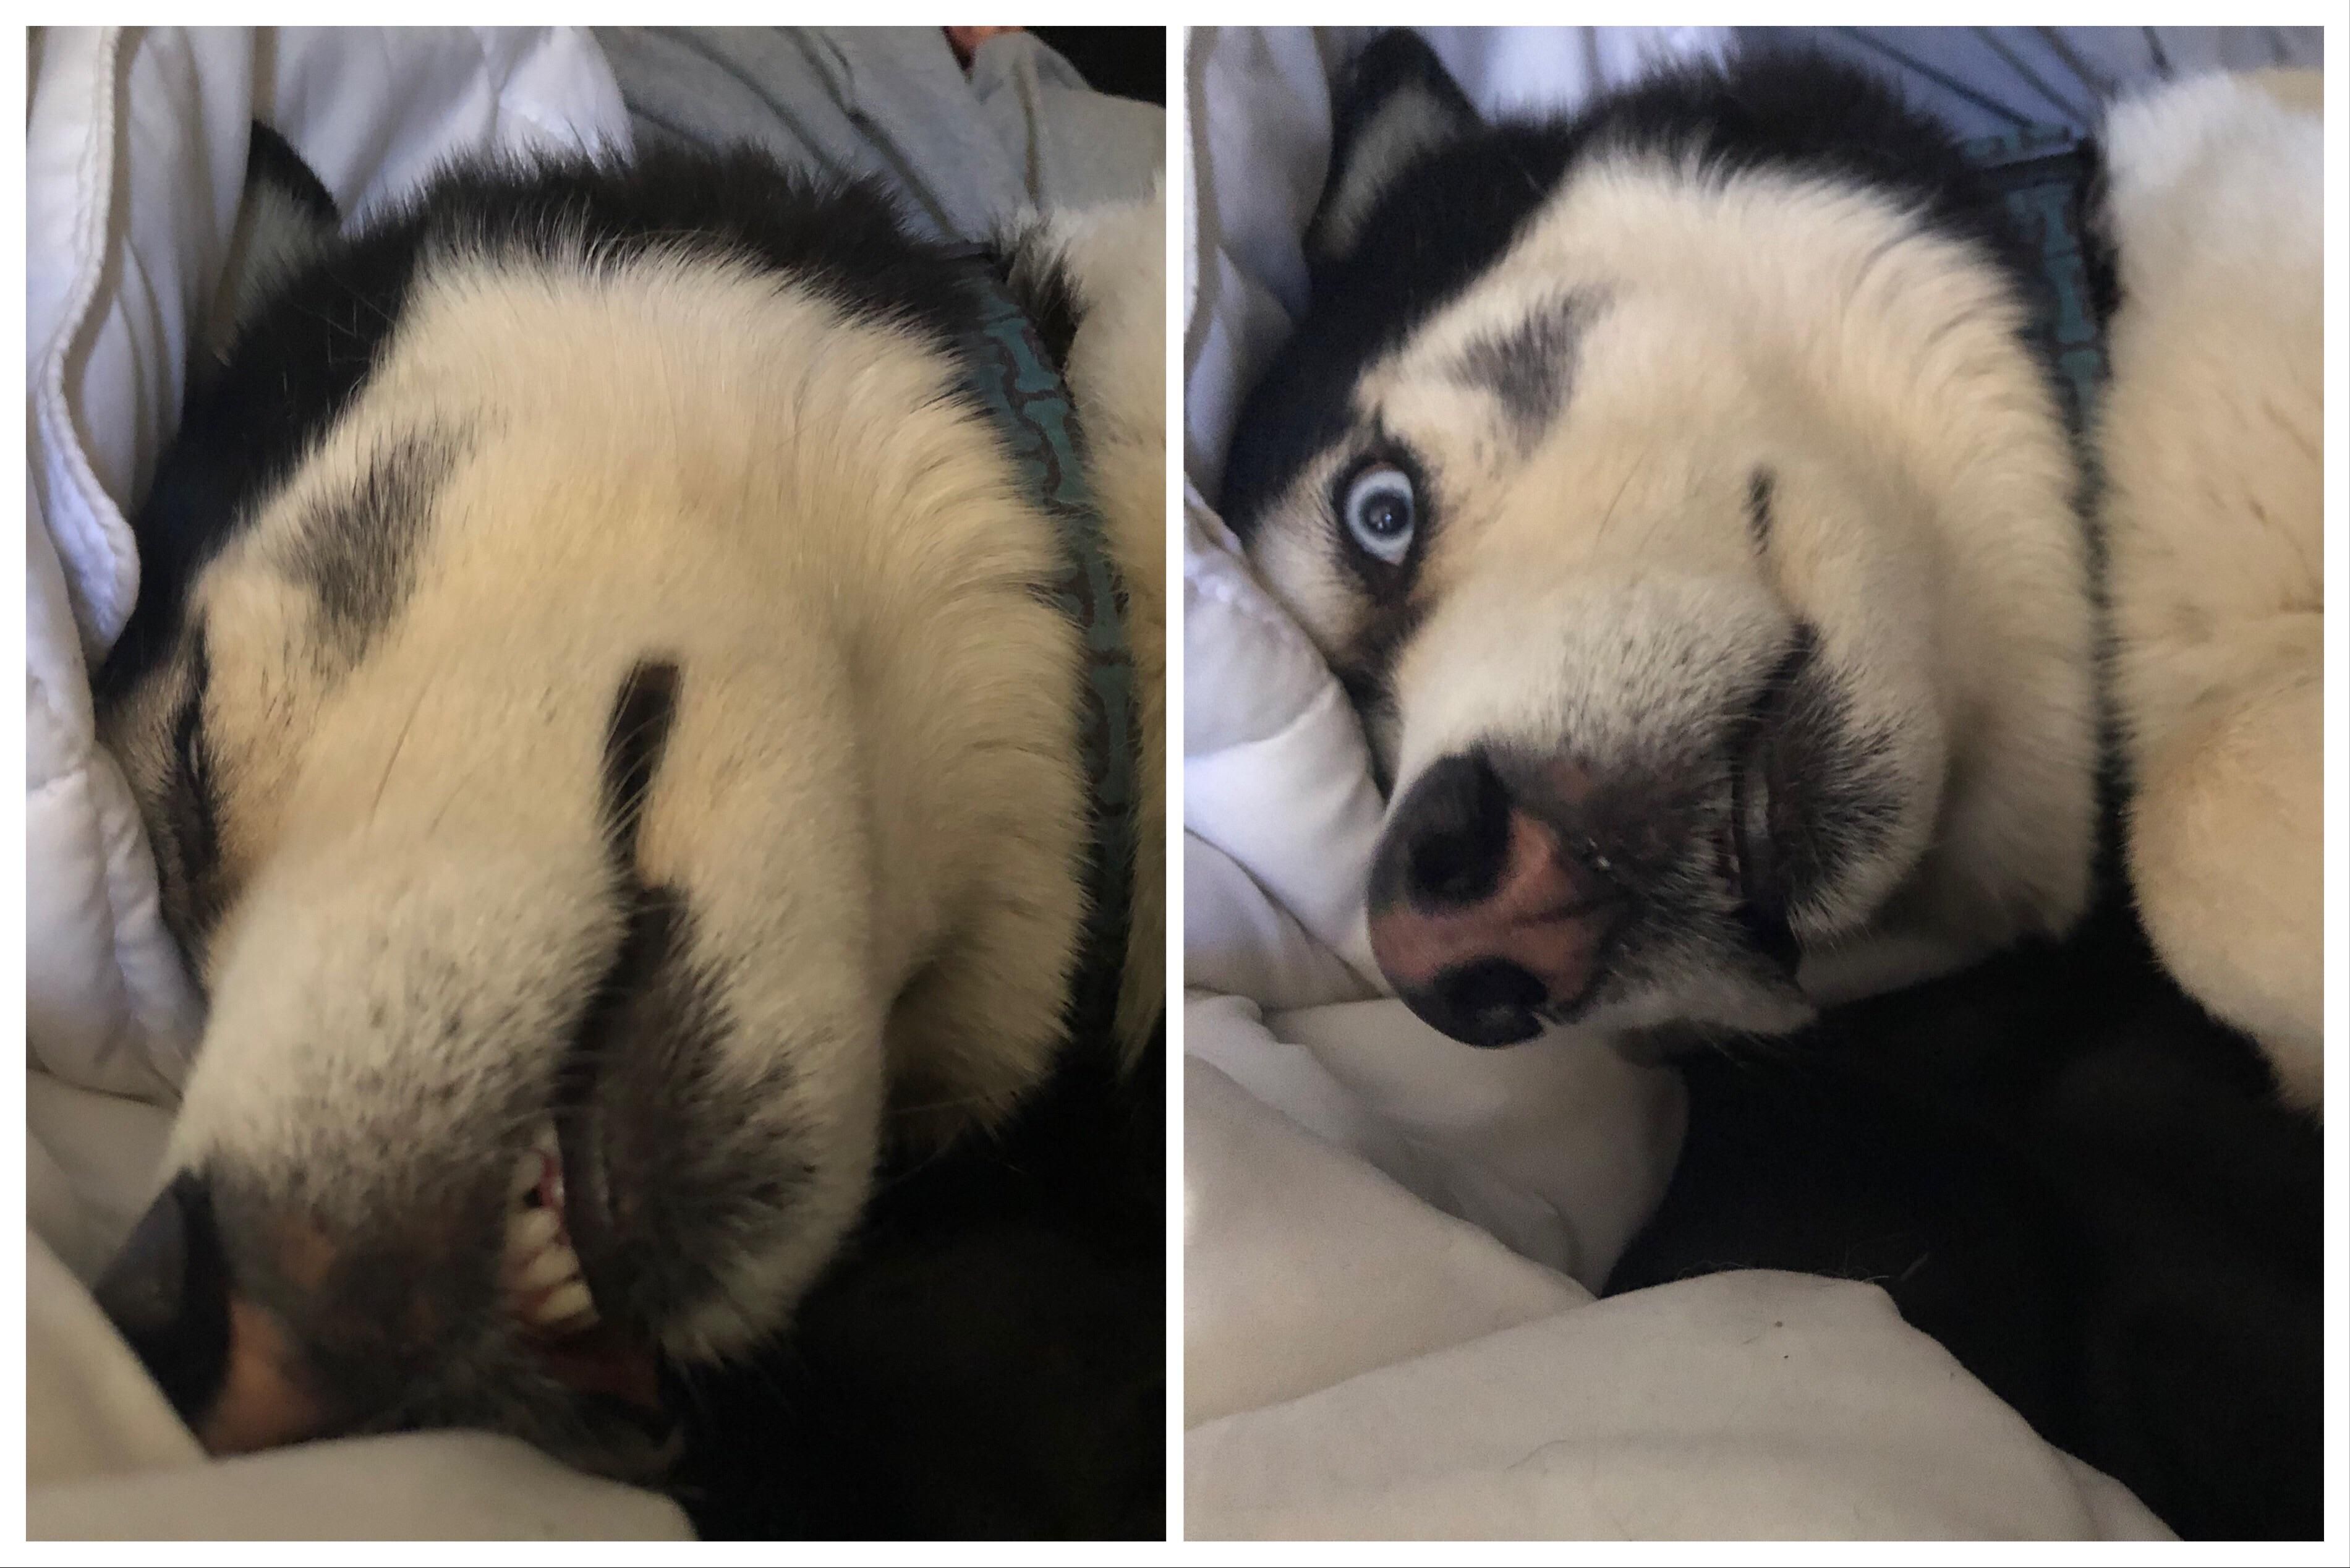 Before and after I accidentally woke him up with the camera sound.